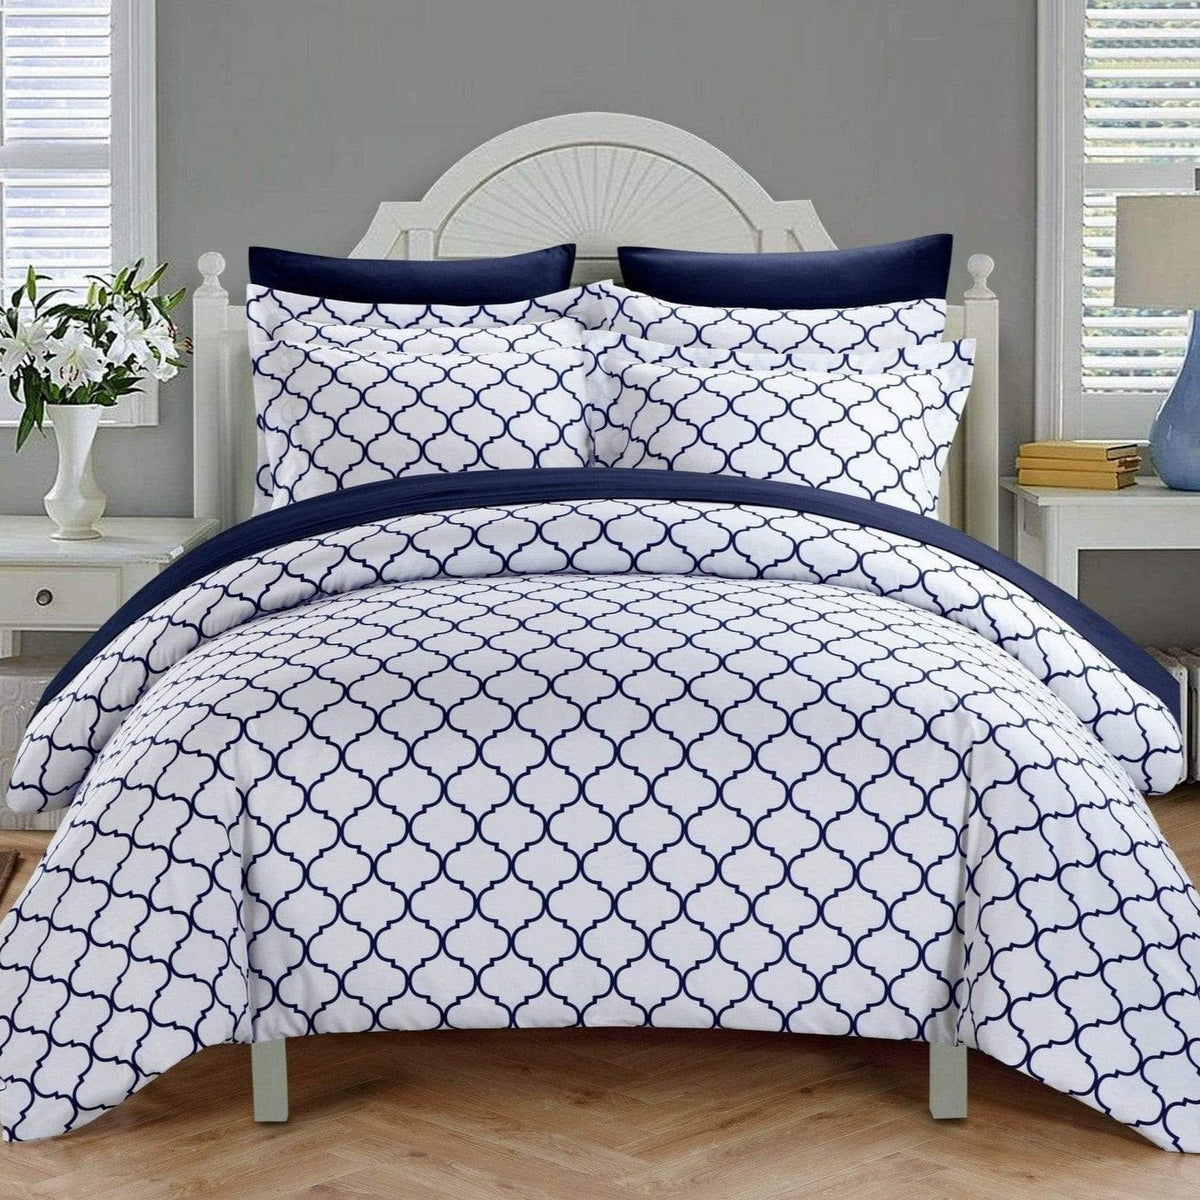 Chic Home Brooklyn 3 Piece Reversible Duvet Cover Set Navy